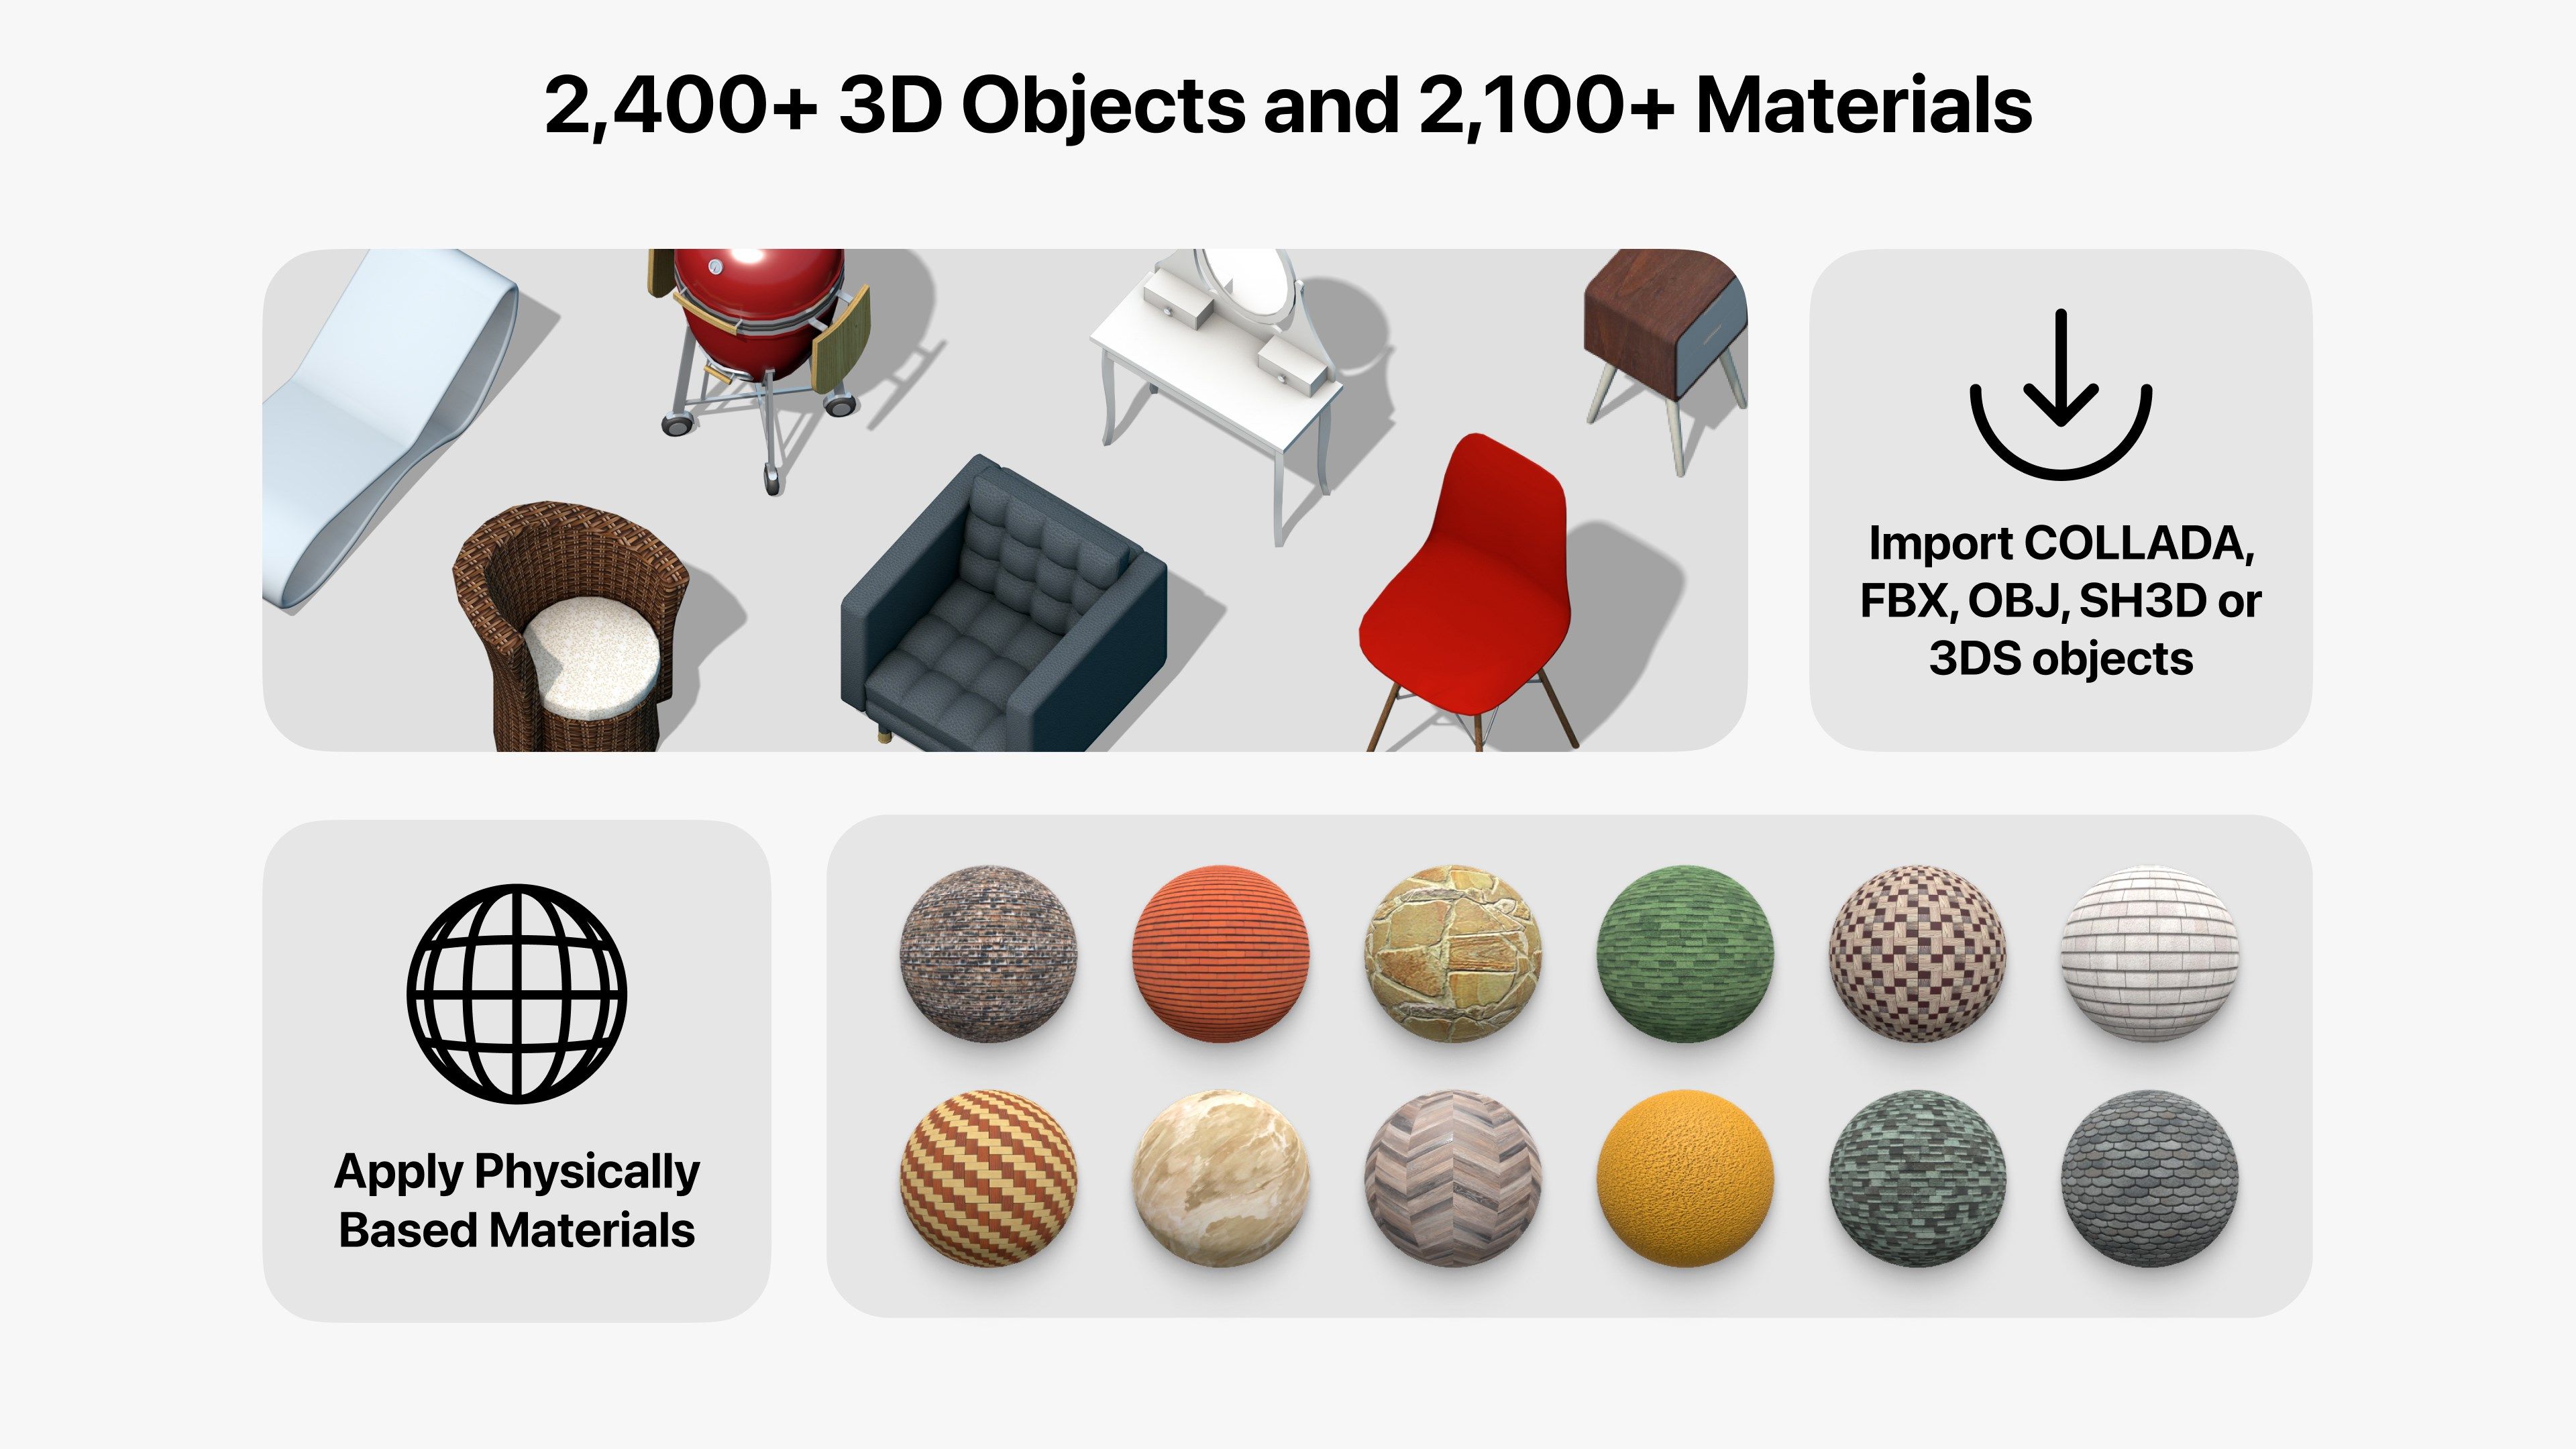 2,400+ 3D Objects and 2,100+ Materials